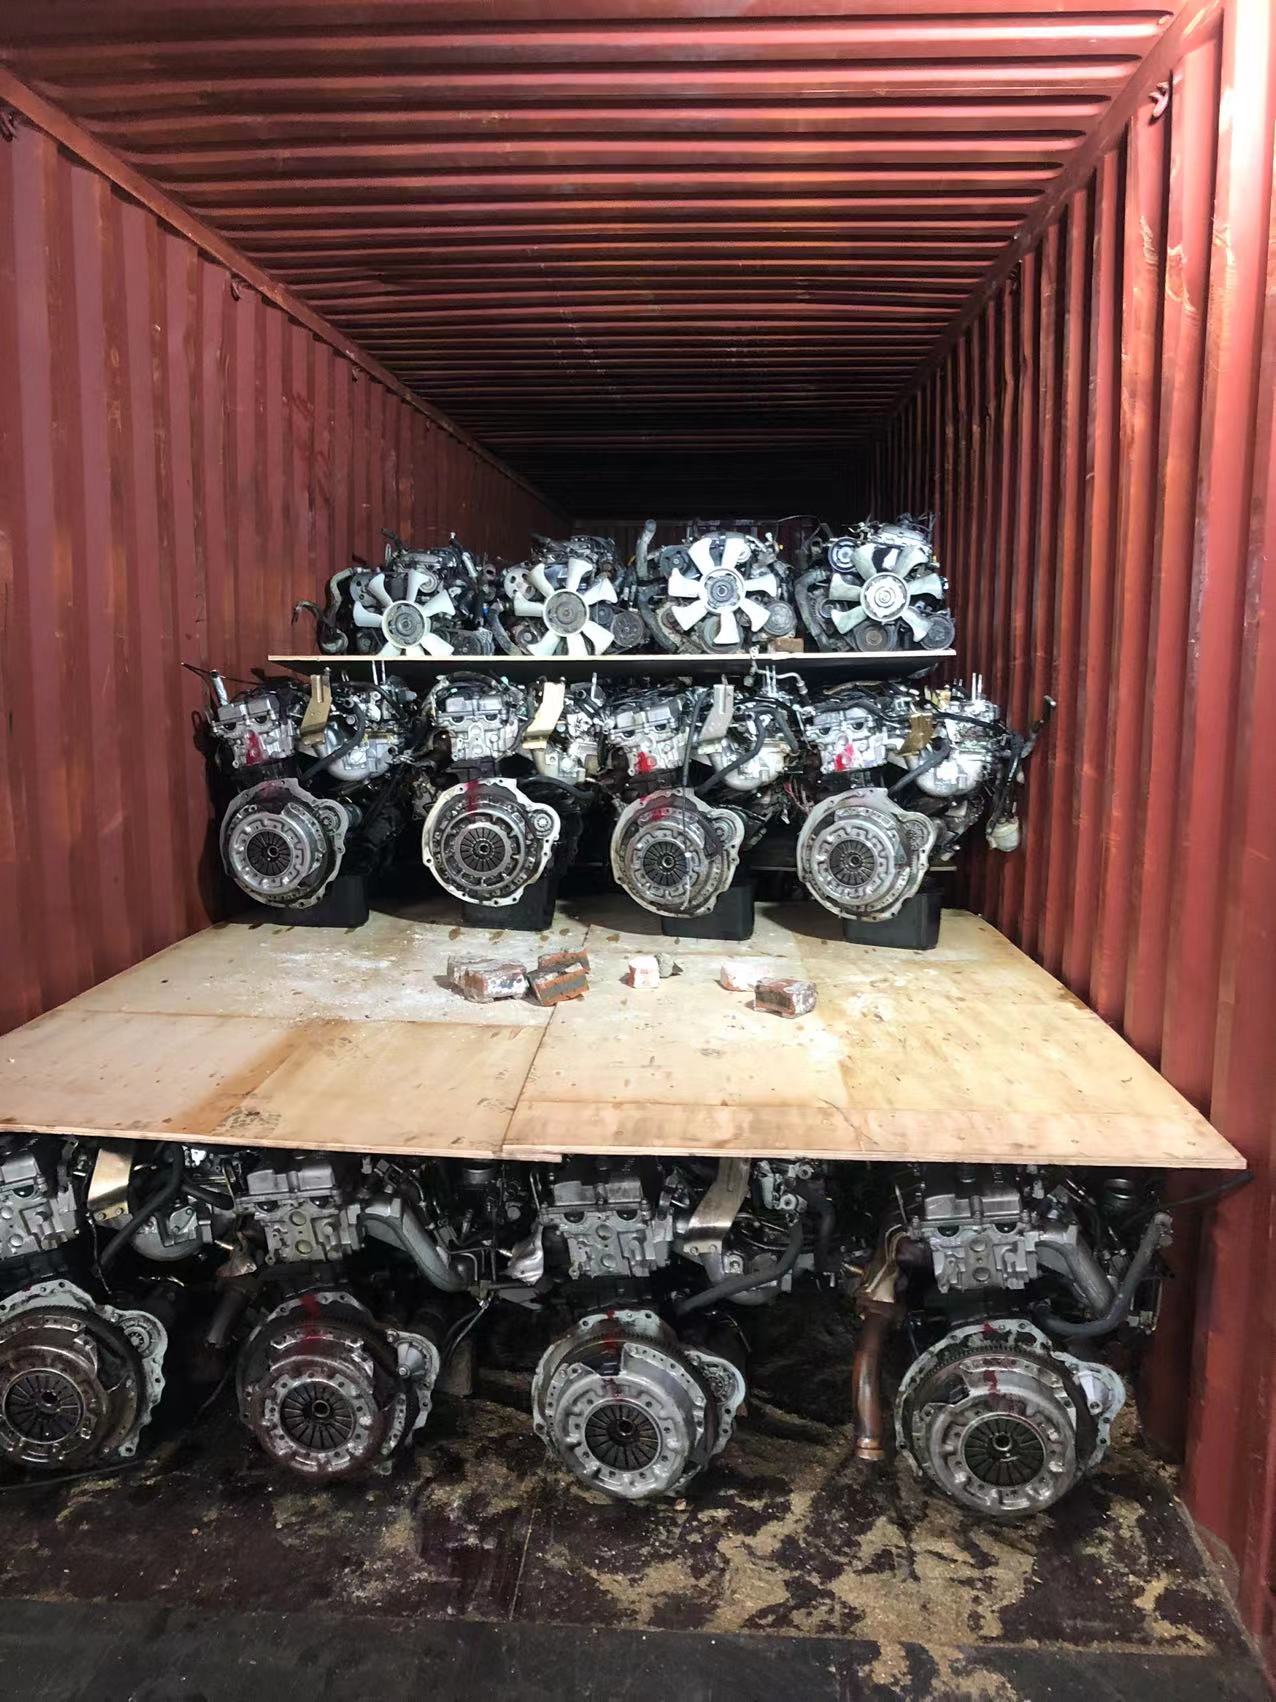 KA24 2.4L engine gasoline fuel xtrail engine load container to Mexico (图8)